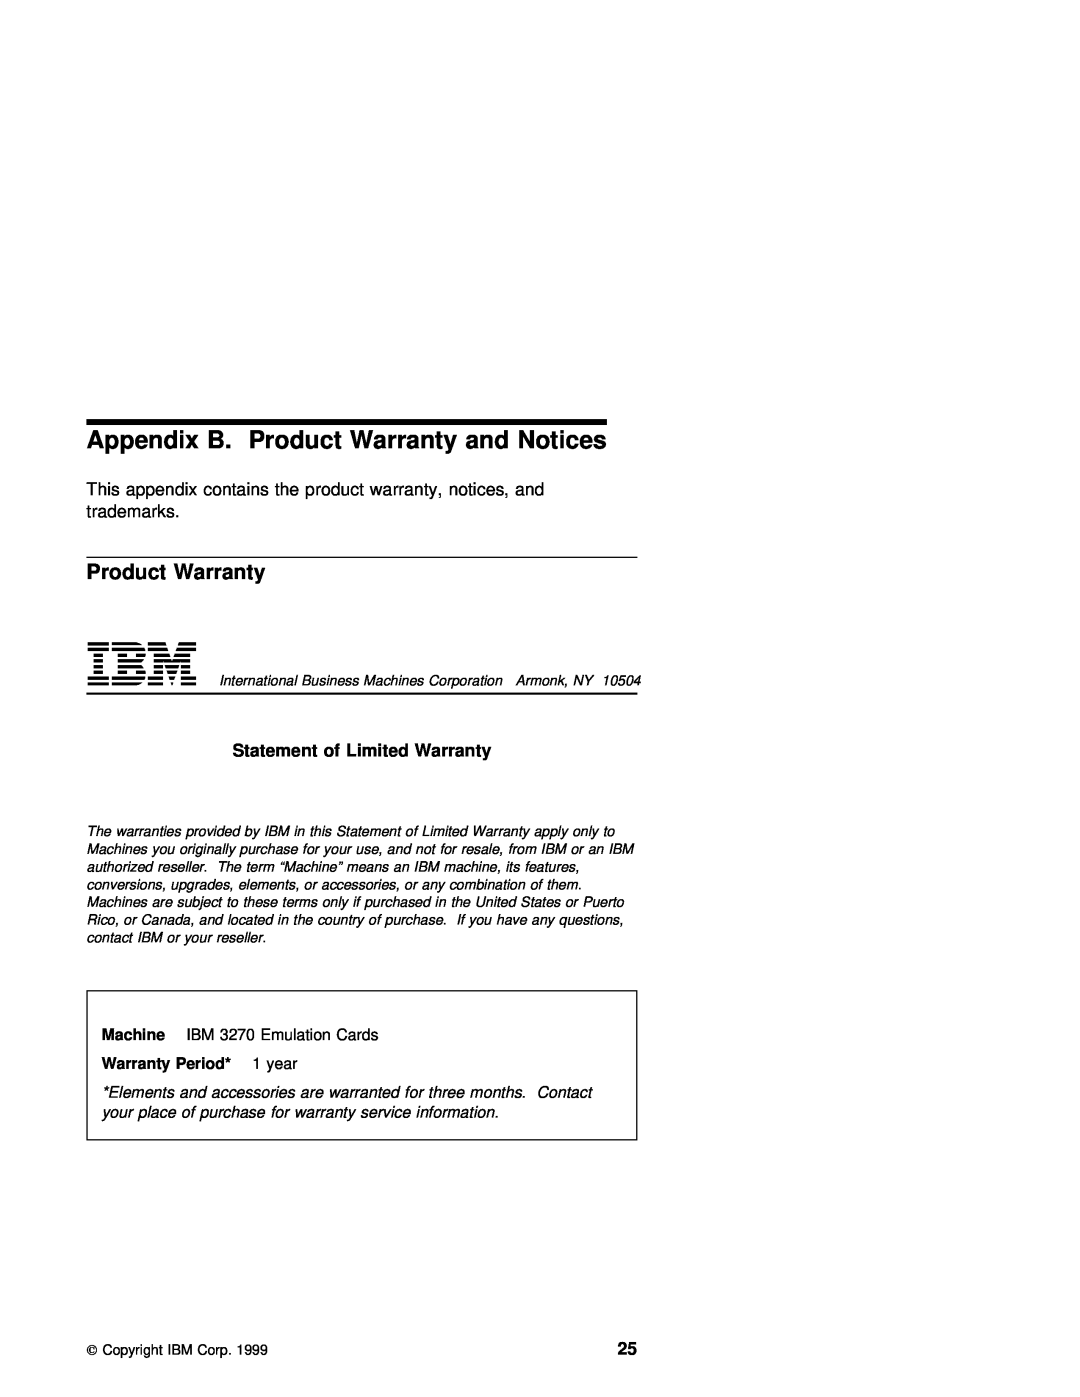 IBM 3270 manual Appendix B. Product Warranty and Notices, Statement of Limited Warranty, Warranty Period, year 